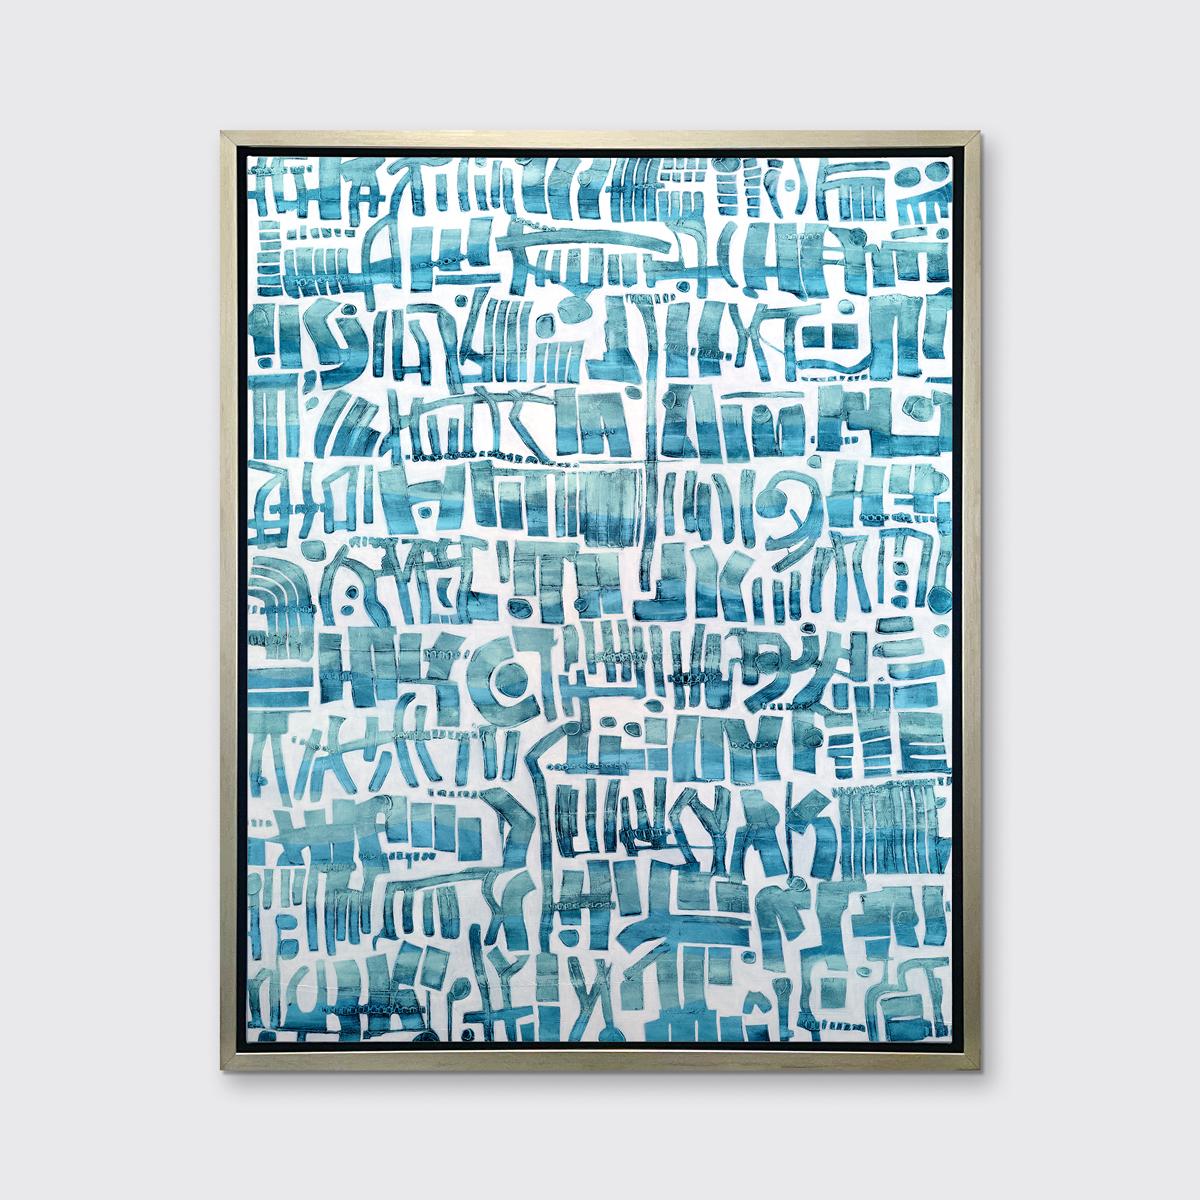 This contemporary abstract limited edition print by Sofie Swann features a light, coastal palette, with blue organic shapes patterned and stacked next to one another on the white background. It is an edition size of 95. Printed on canvas, this